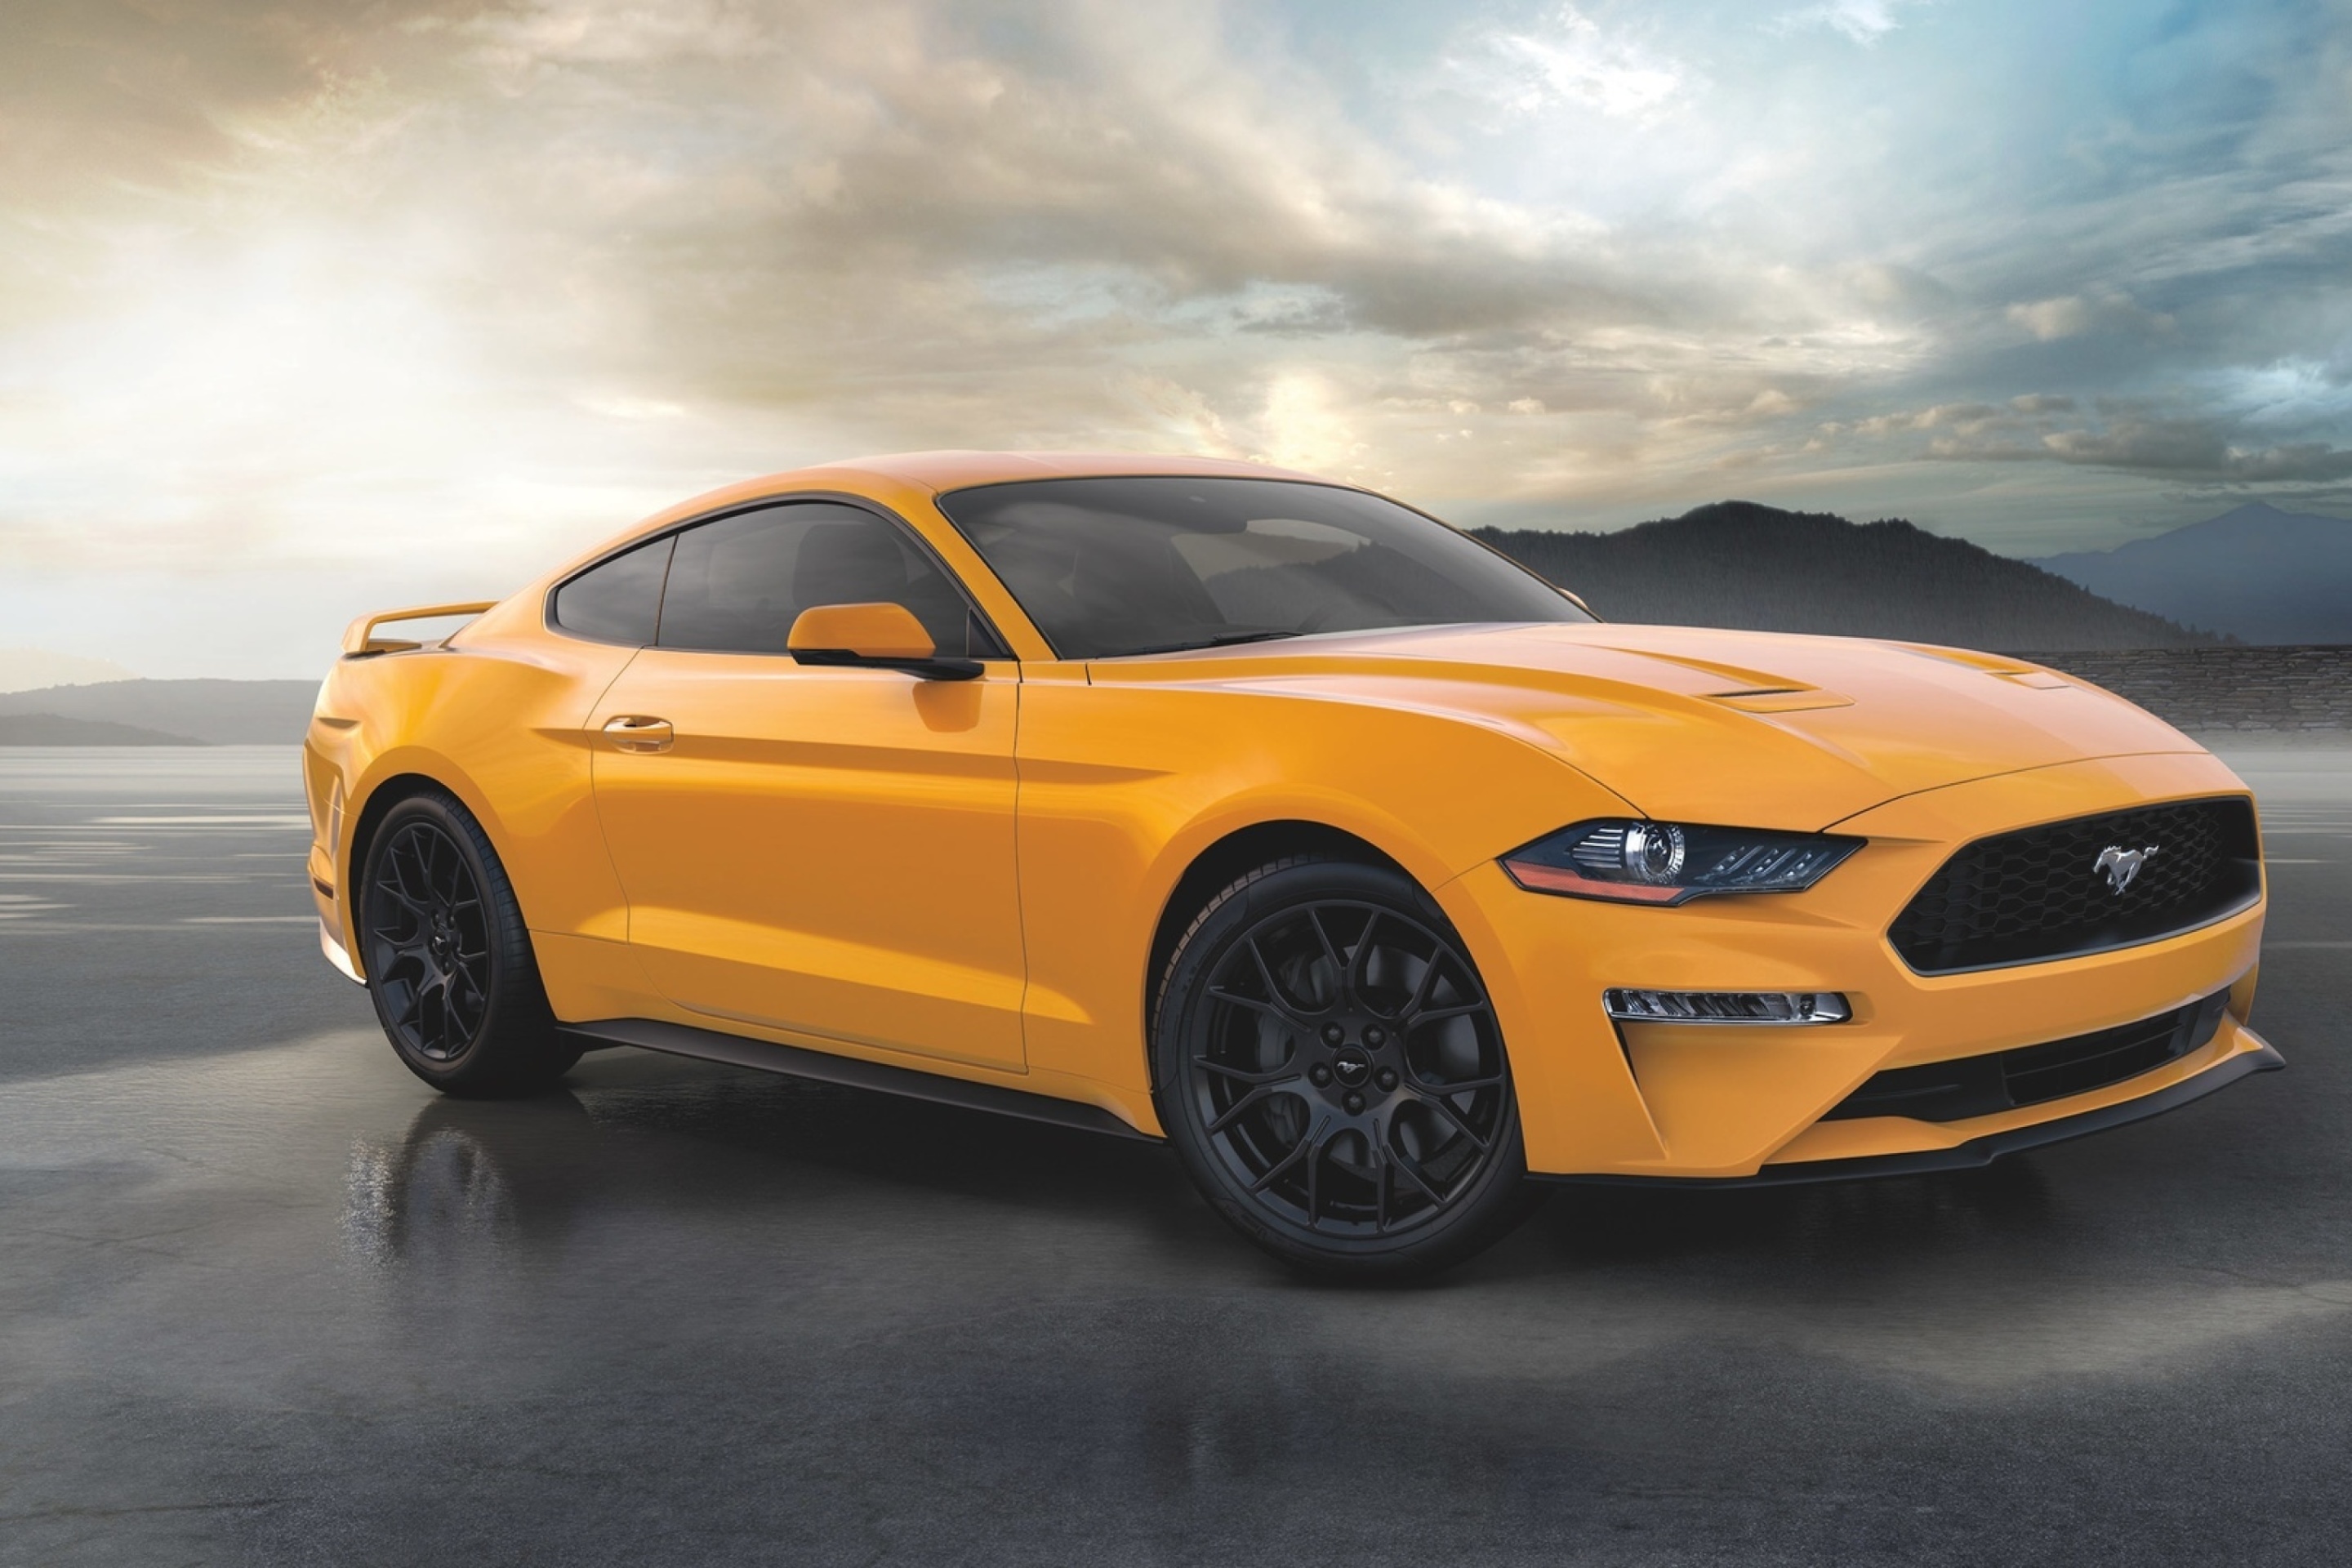 Das Ford Mustang Coupe Wallpaper 2880x1920